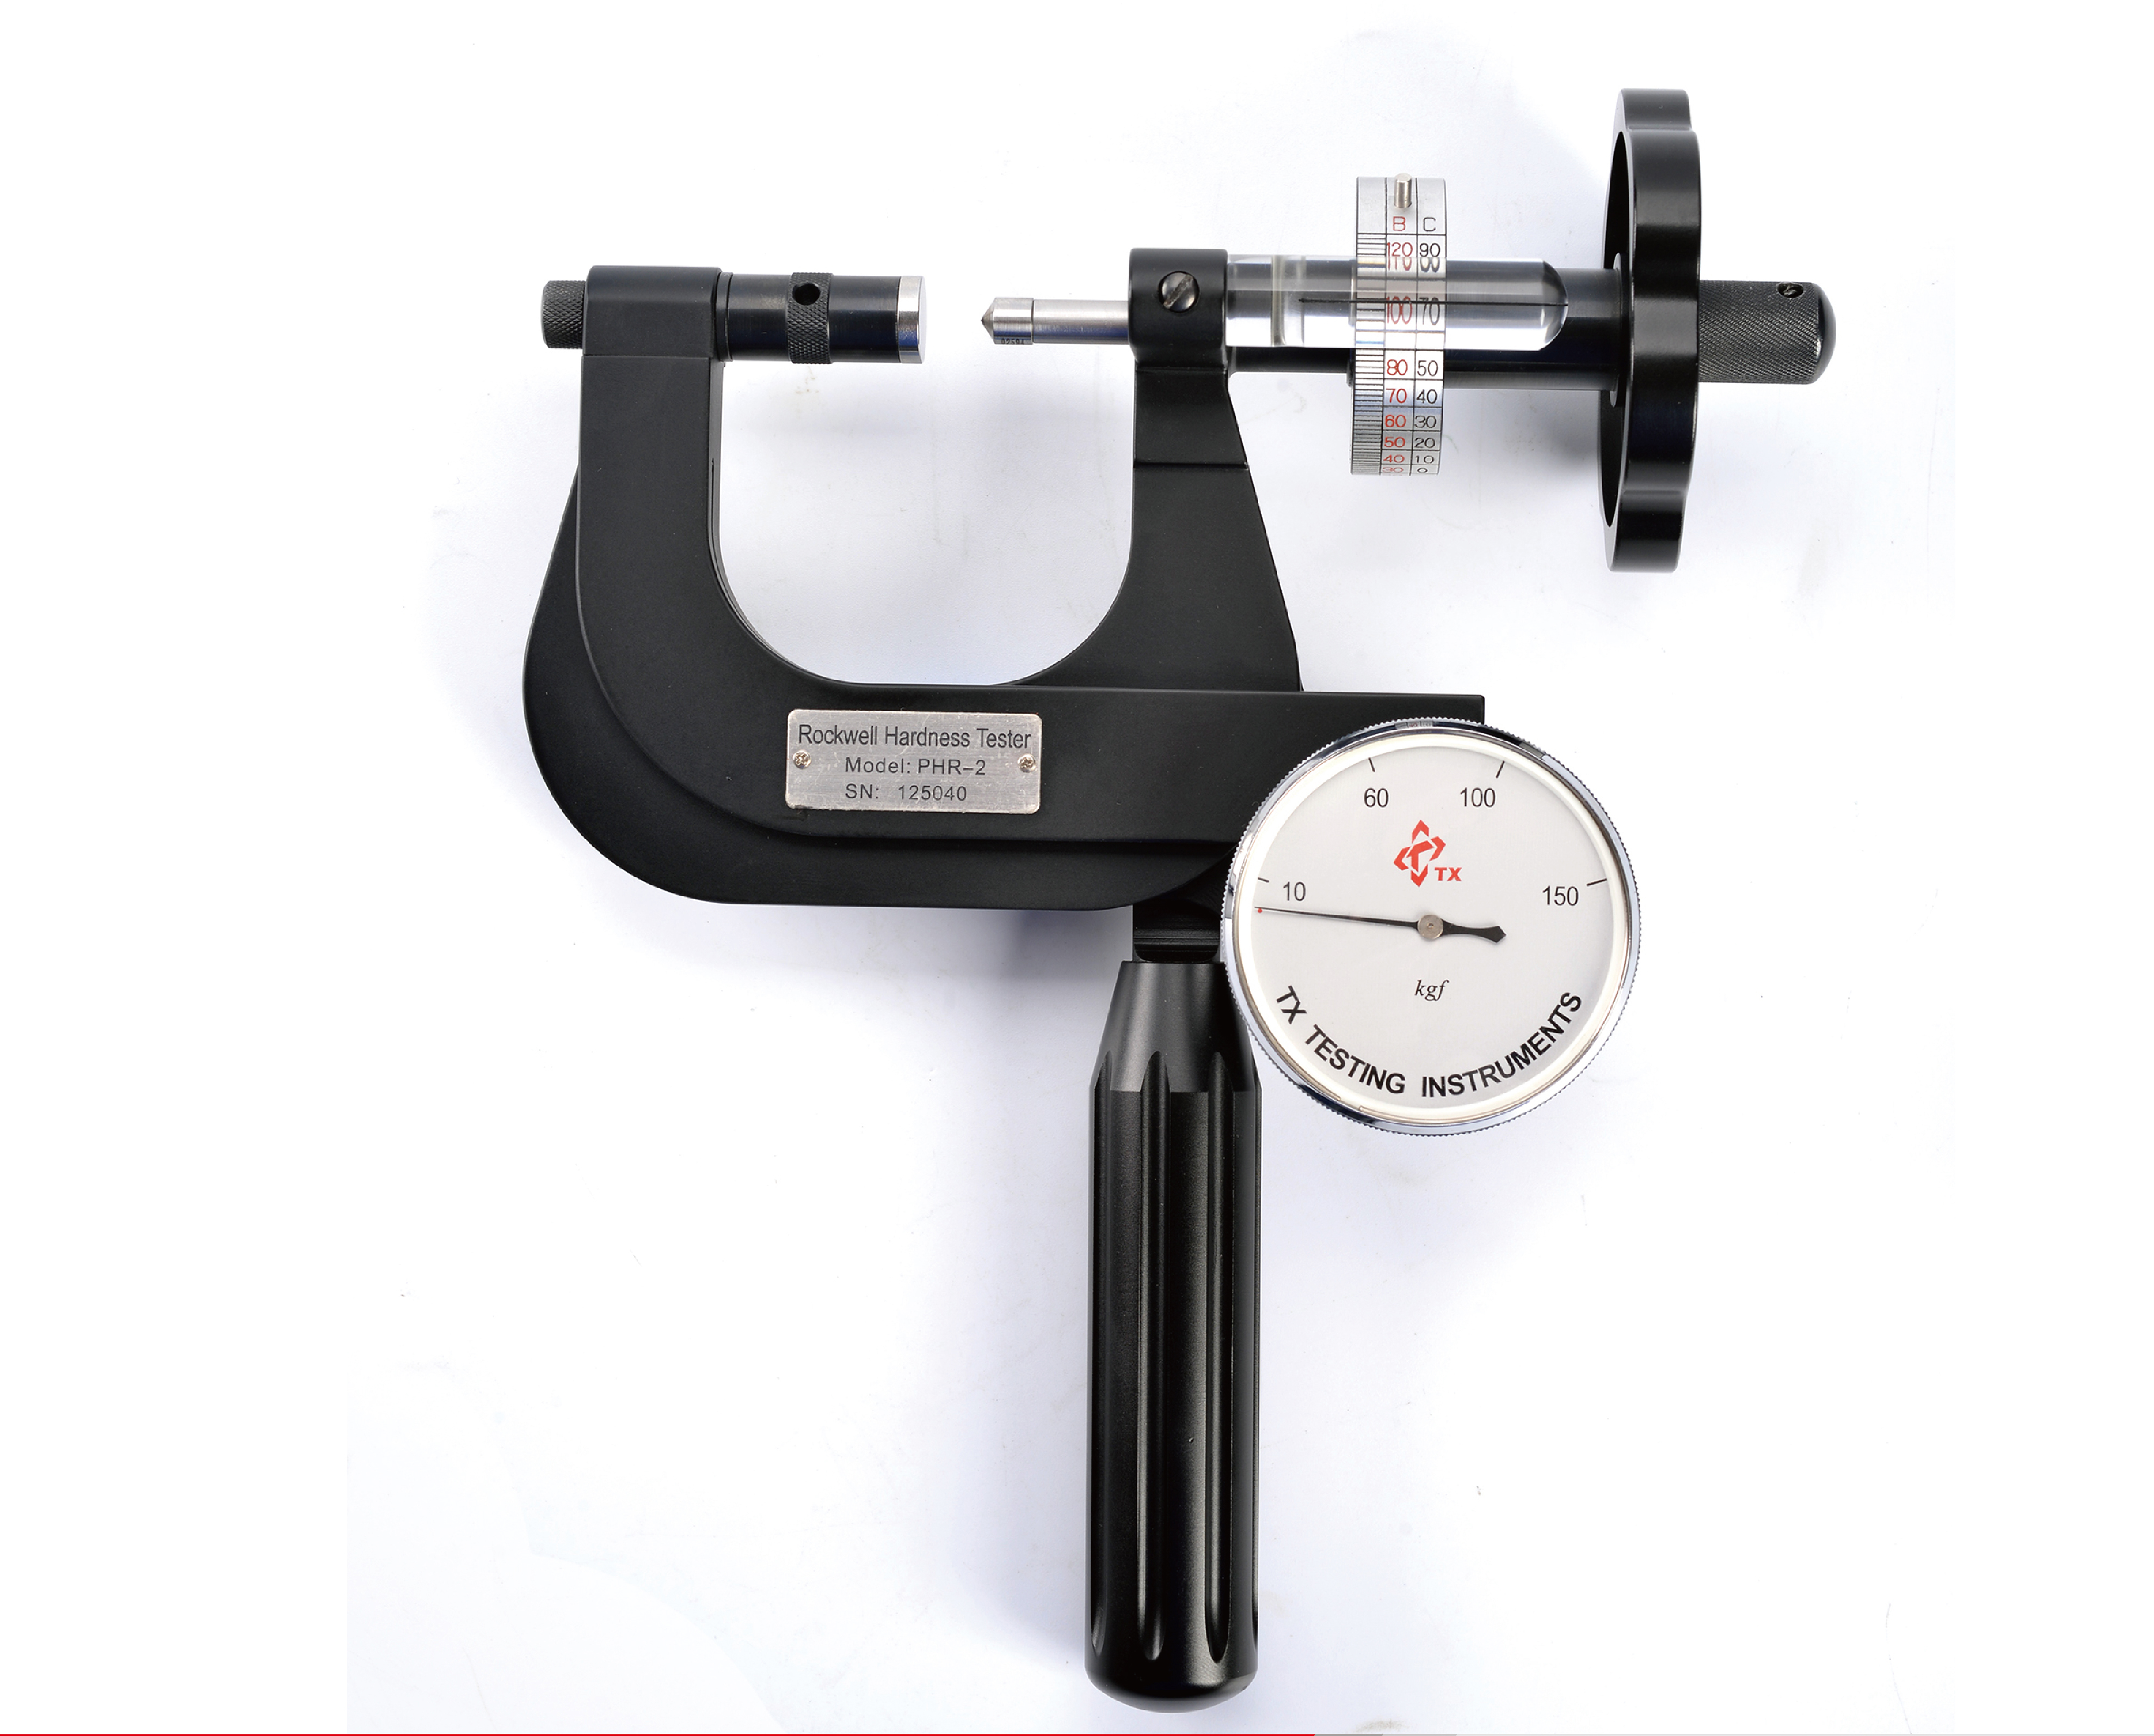 Solution of Portable Rockwell Hardness Tester